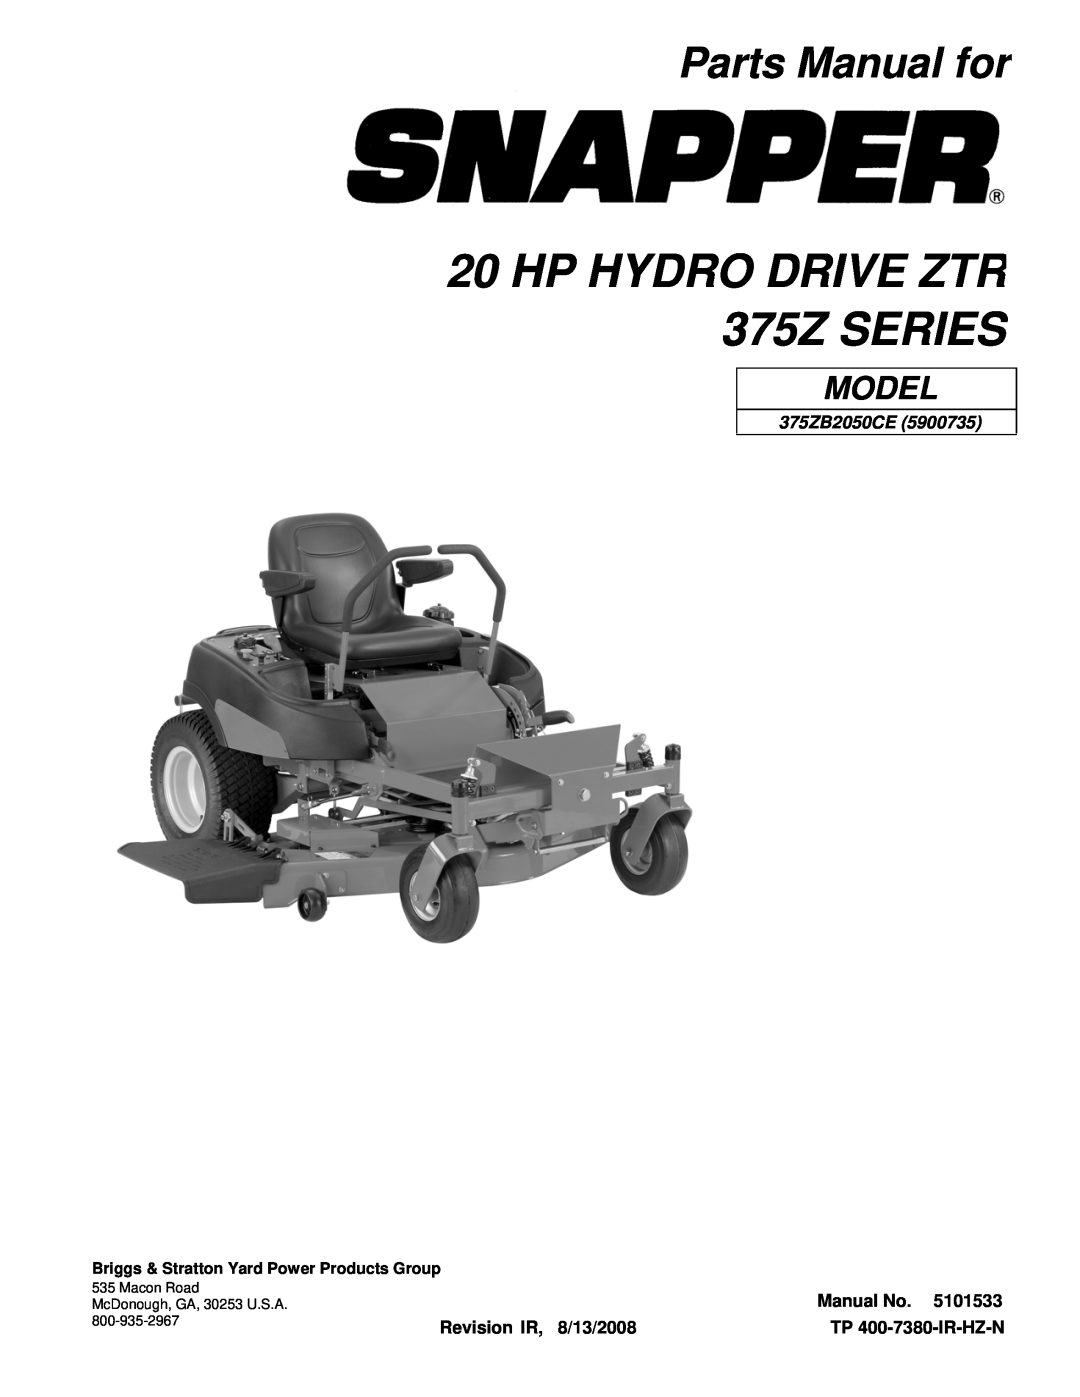 Snapper manual Parts Manual for, HP HYDRO DRIVE ZTR 375Z SERIES, Model, 375ZB2050CE, Macon Road, 800-935-2967 